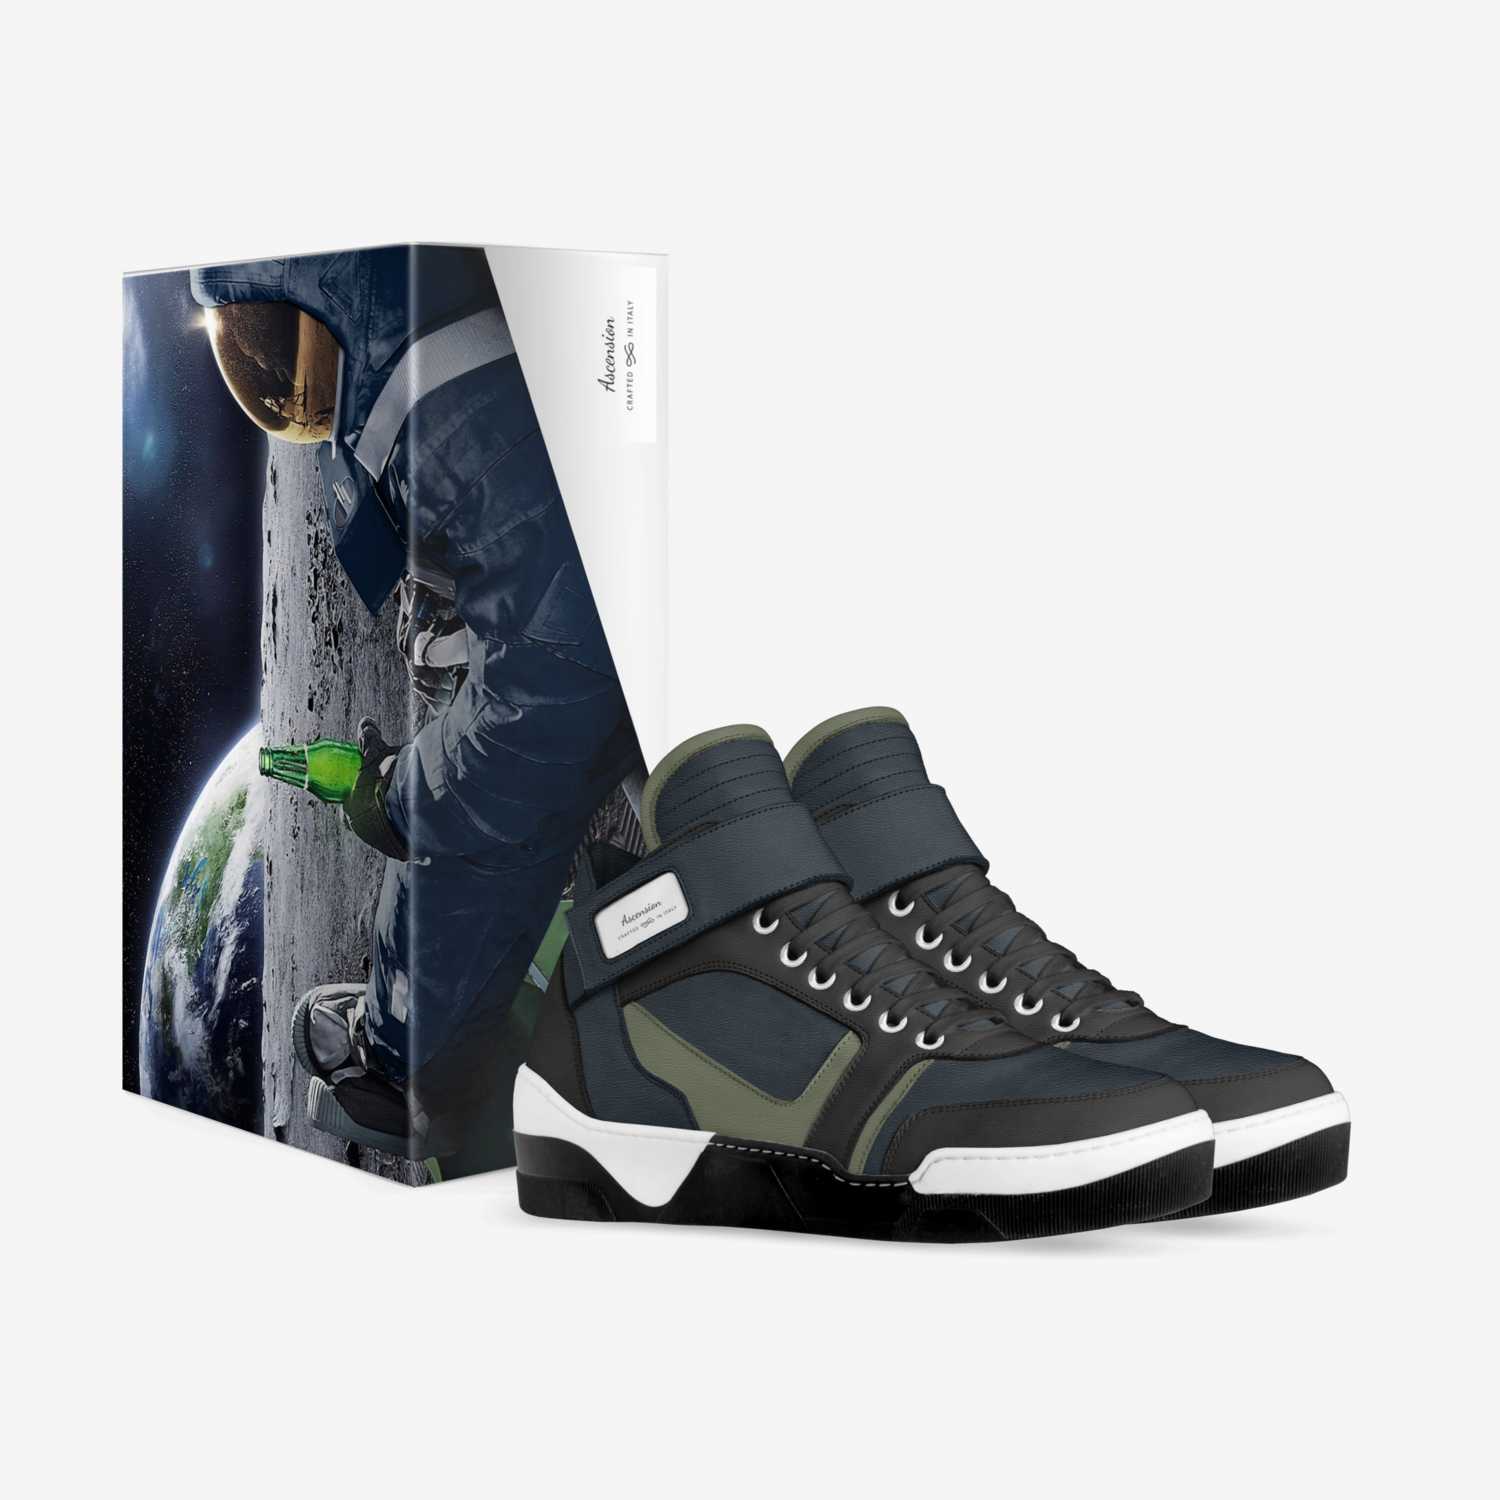 Ascension custom made in Italy shoes by Antoine Harris | Box view